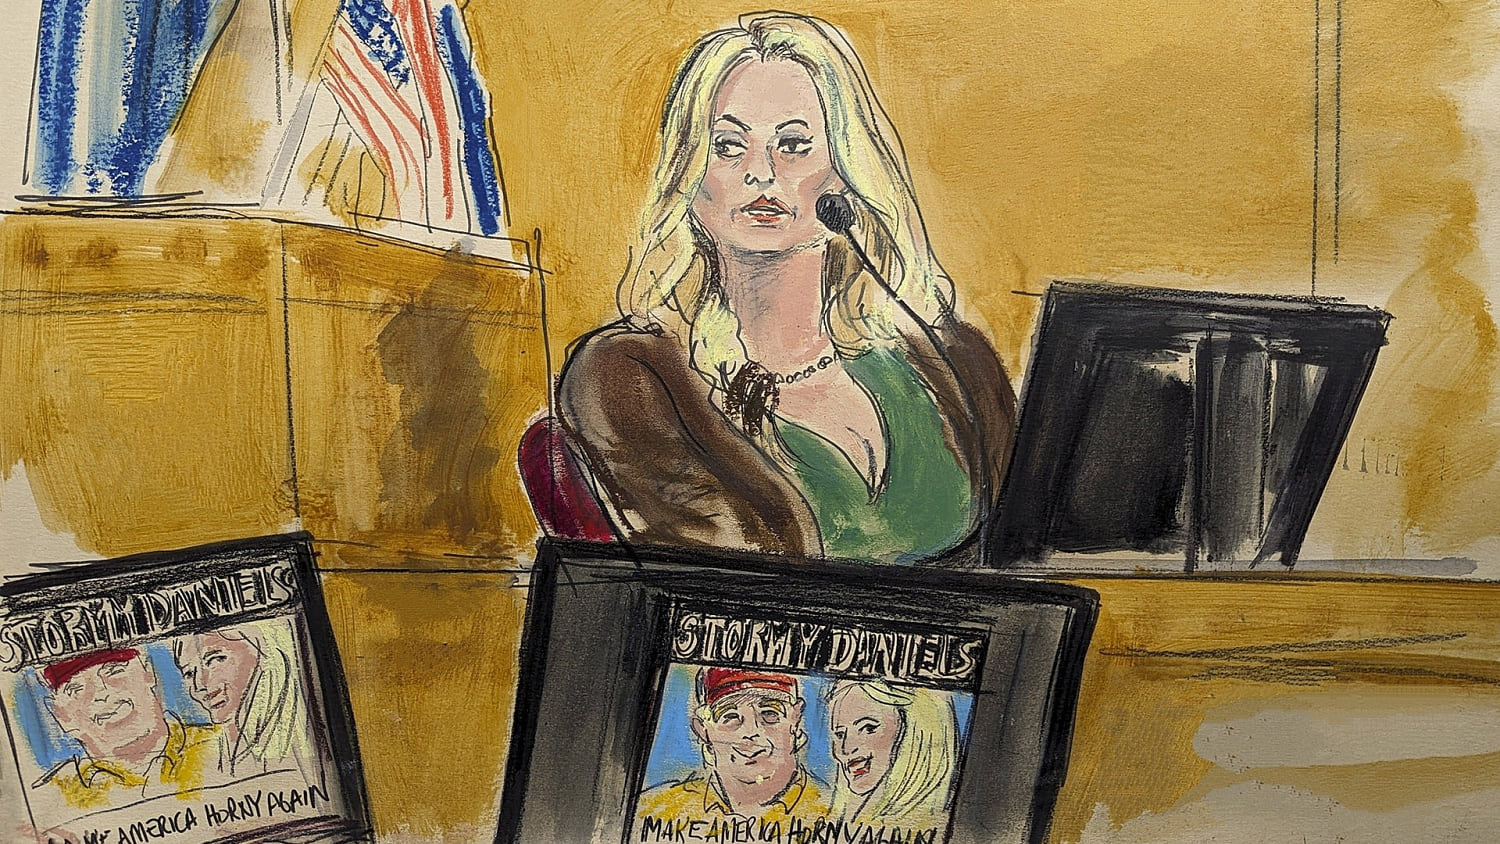 Stormy Daniels clashes with Trump defense at hush money trial